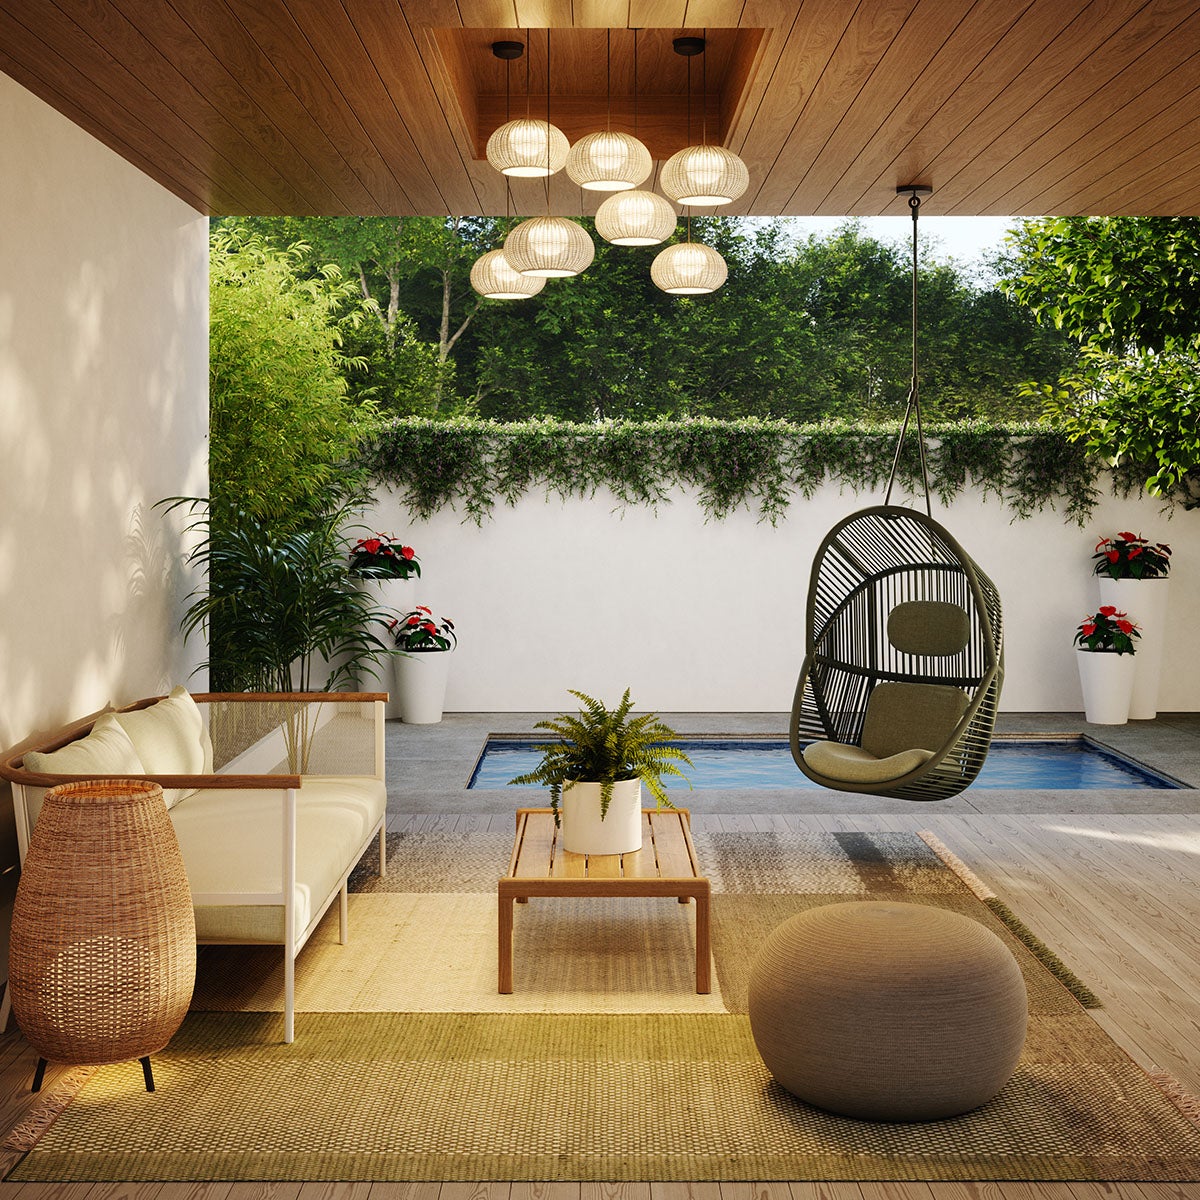 Outdoor patio scene filled with natural materials, a pool in the background, and lots greenery